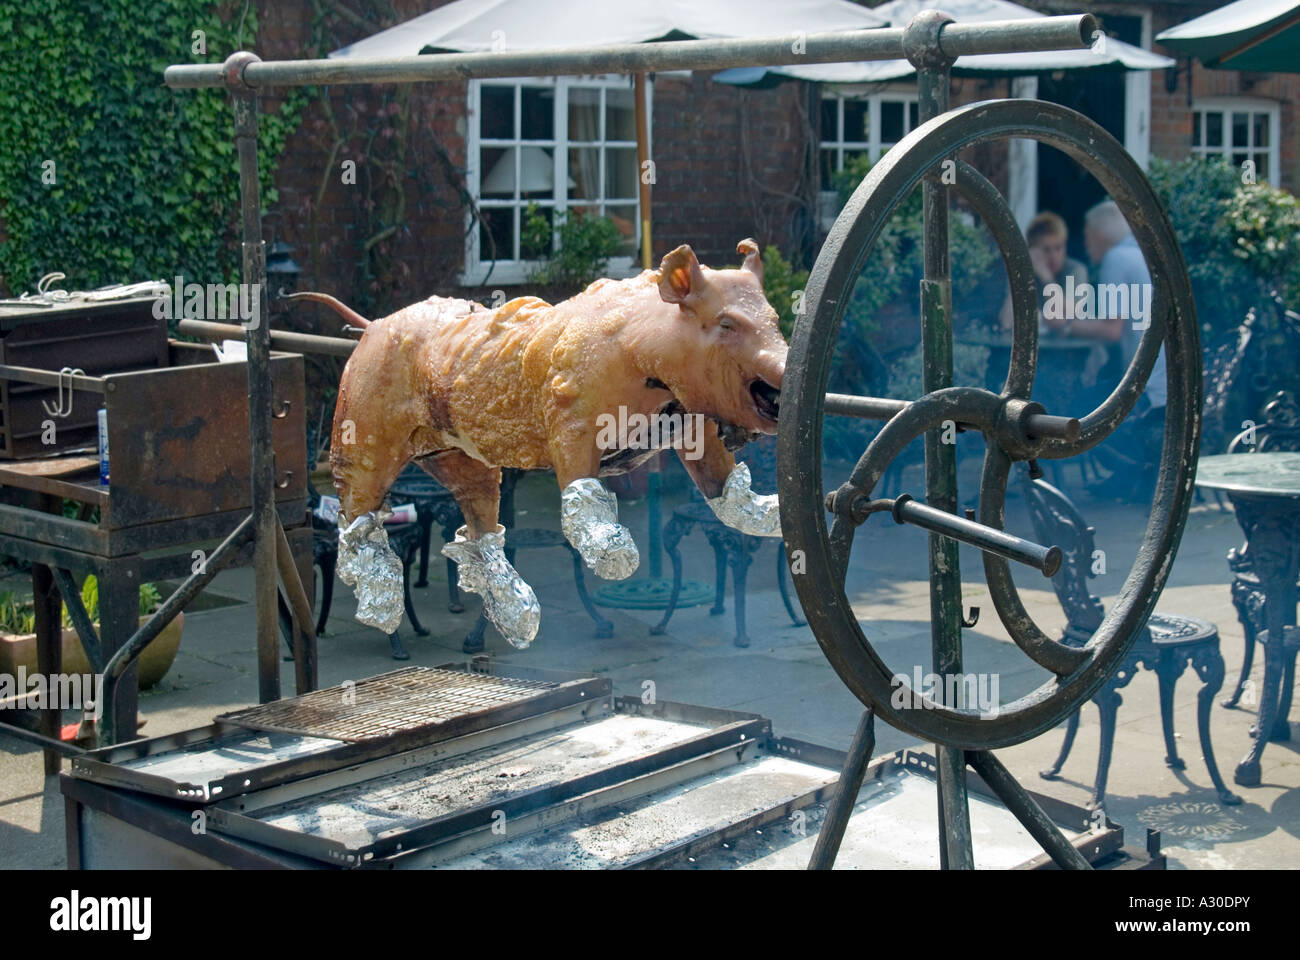 Pig carcass being roasted on traditional outdoor rotating spit in roadside forecourt at rural inn pub to be served as roast pork Essex England UK Stock Photo